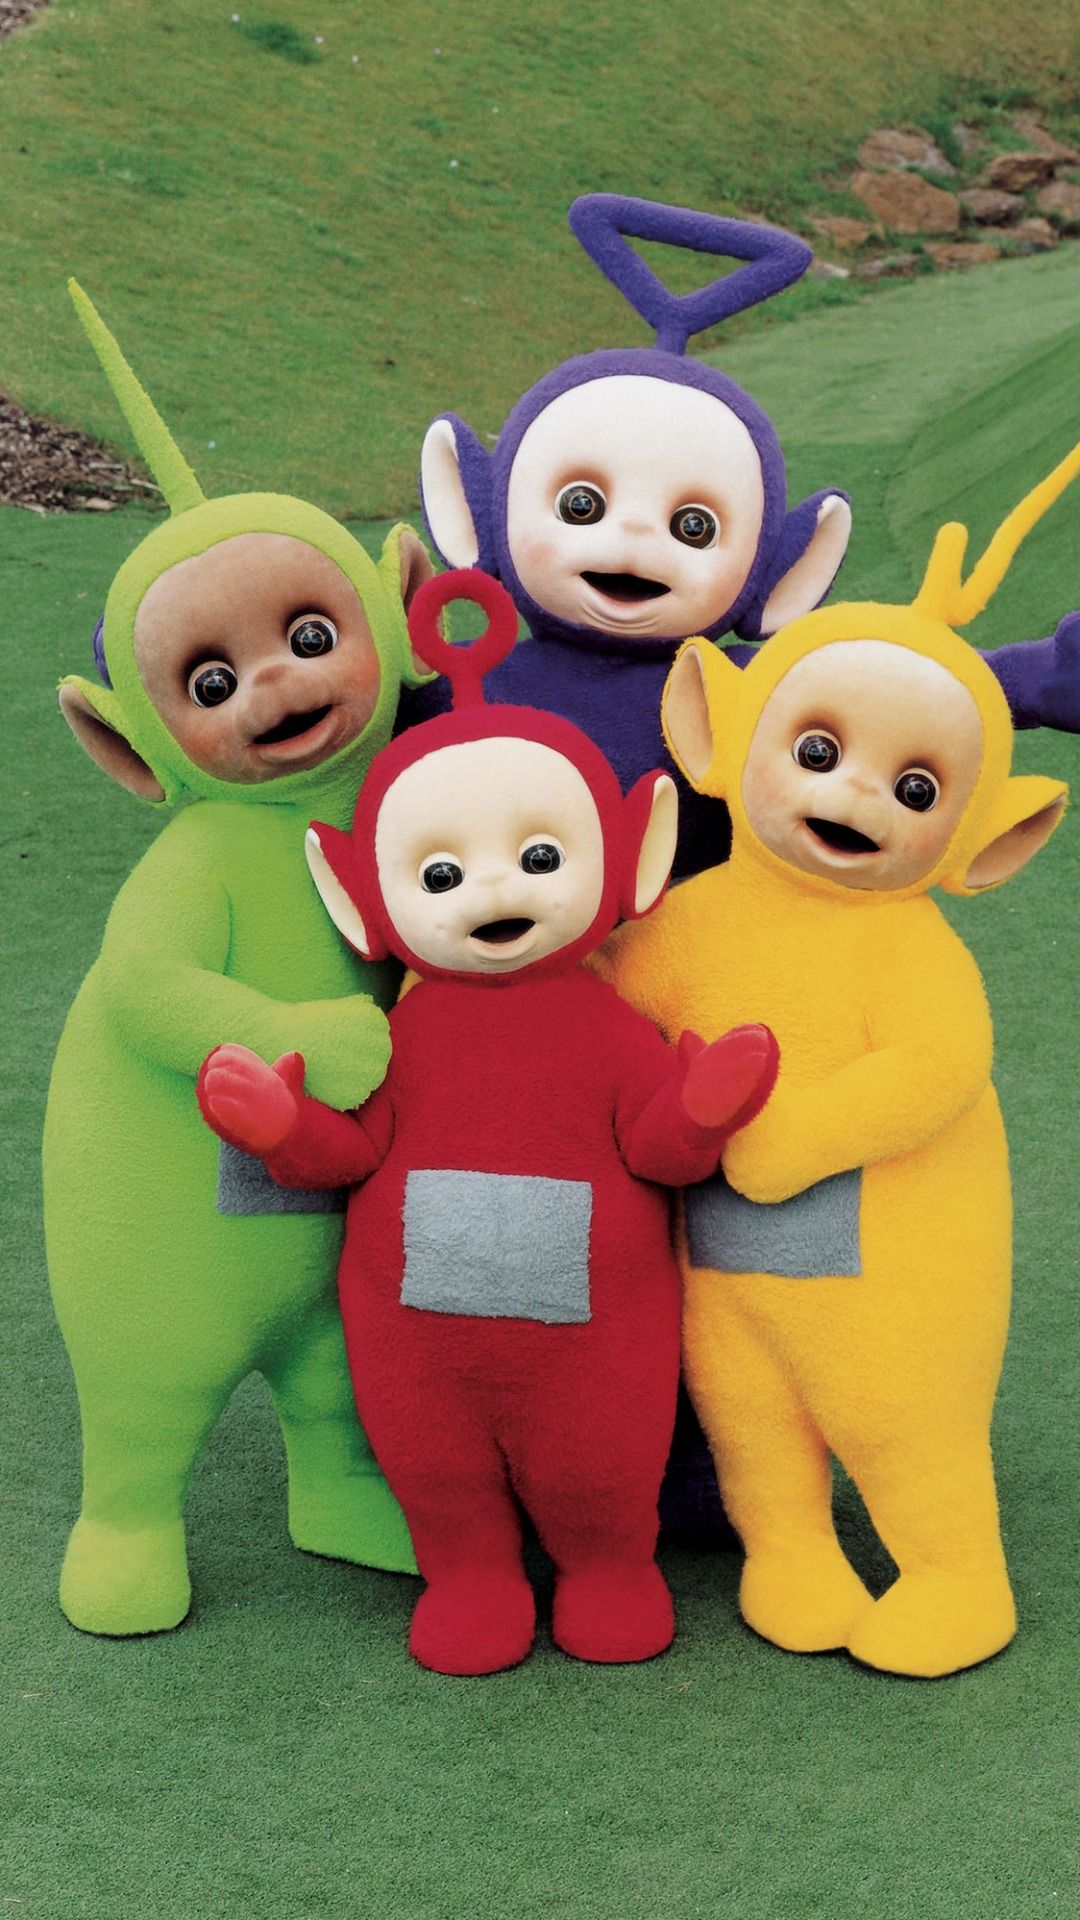 Download Teletubbies 1080 x 1920 Wallpapers - 4543993